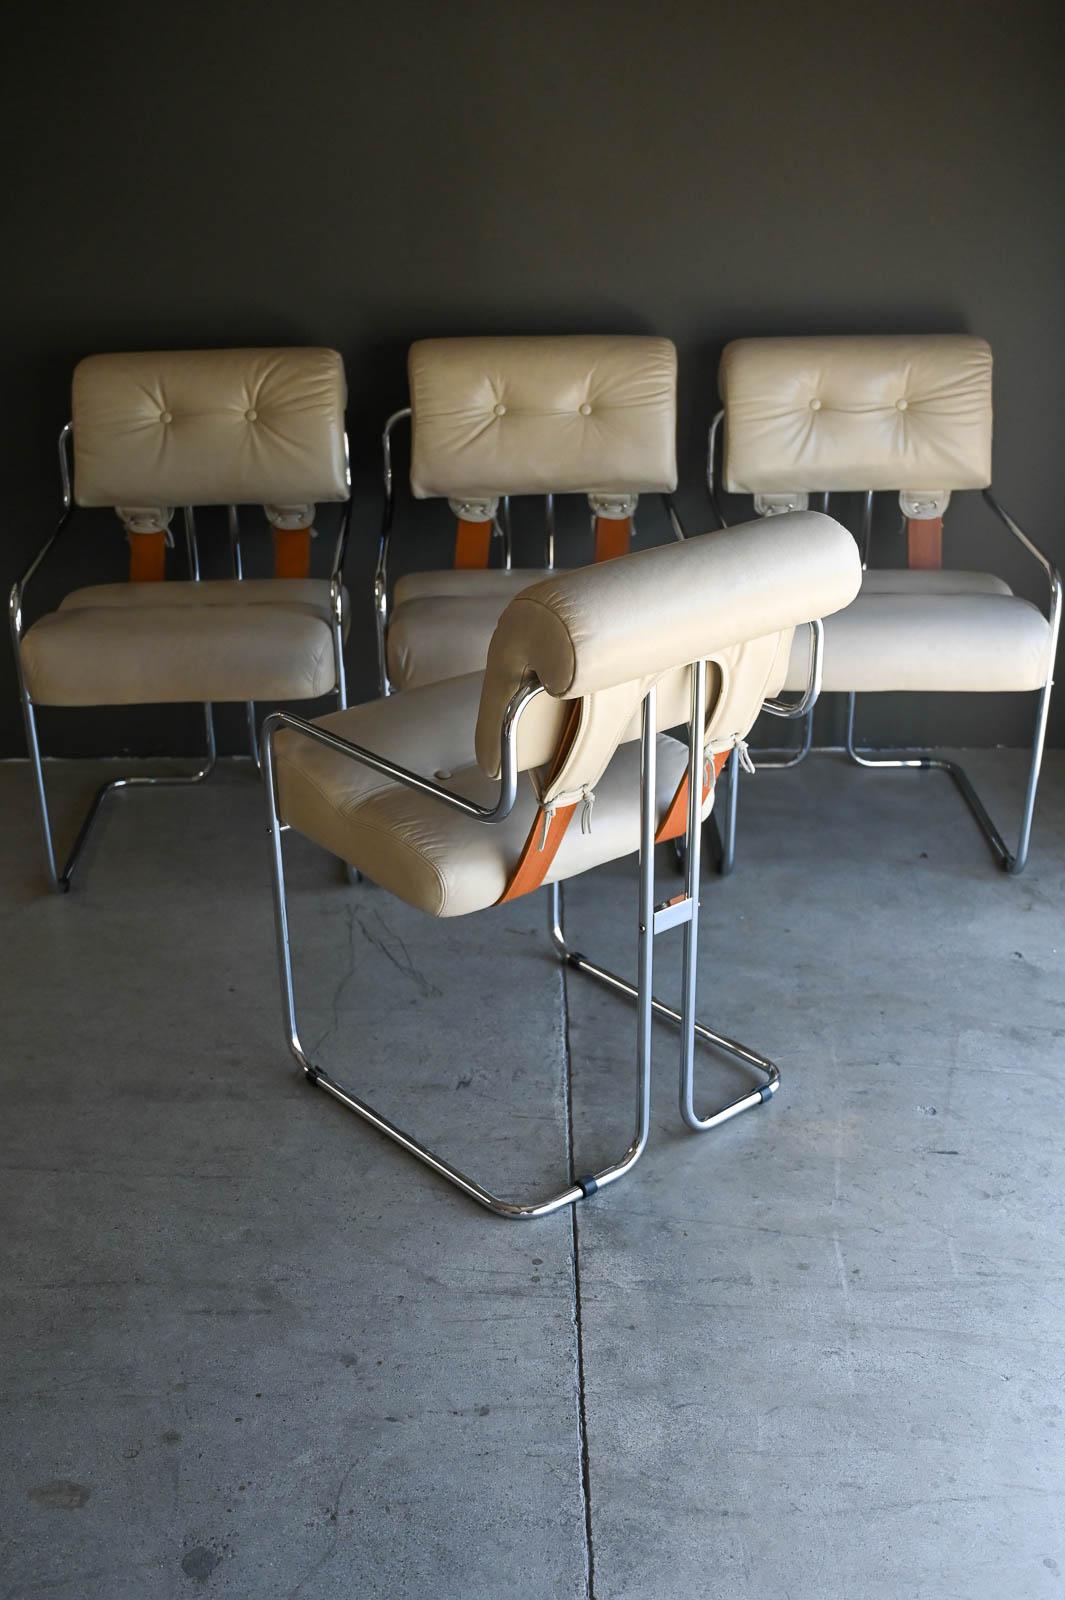 Guido Faleschini Tucroma Chairs for i4 Mariani, Italy ca. 1970.  Beautiful cream leather with original embossed saddle leather strapping and tubular chrome frames.  Leather is in very good original condition, has been conditioned and cleaned